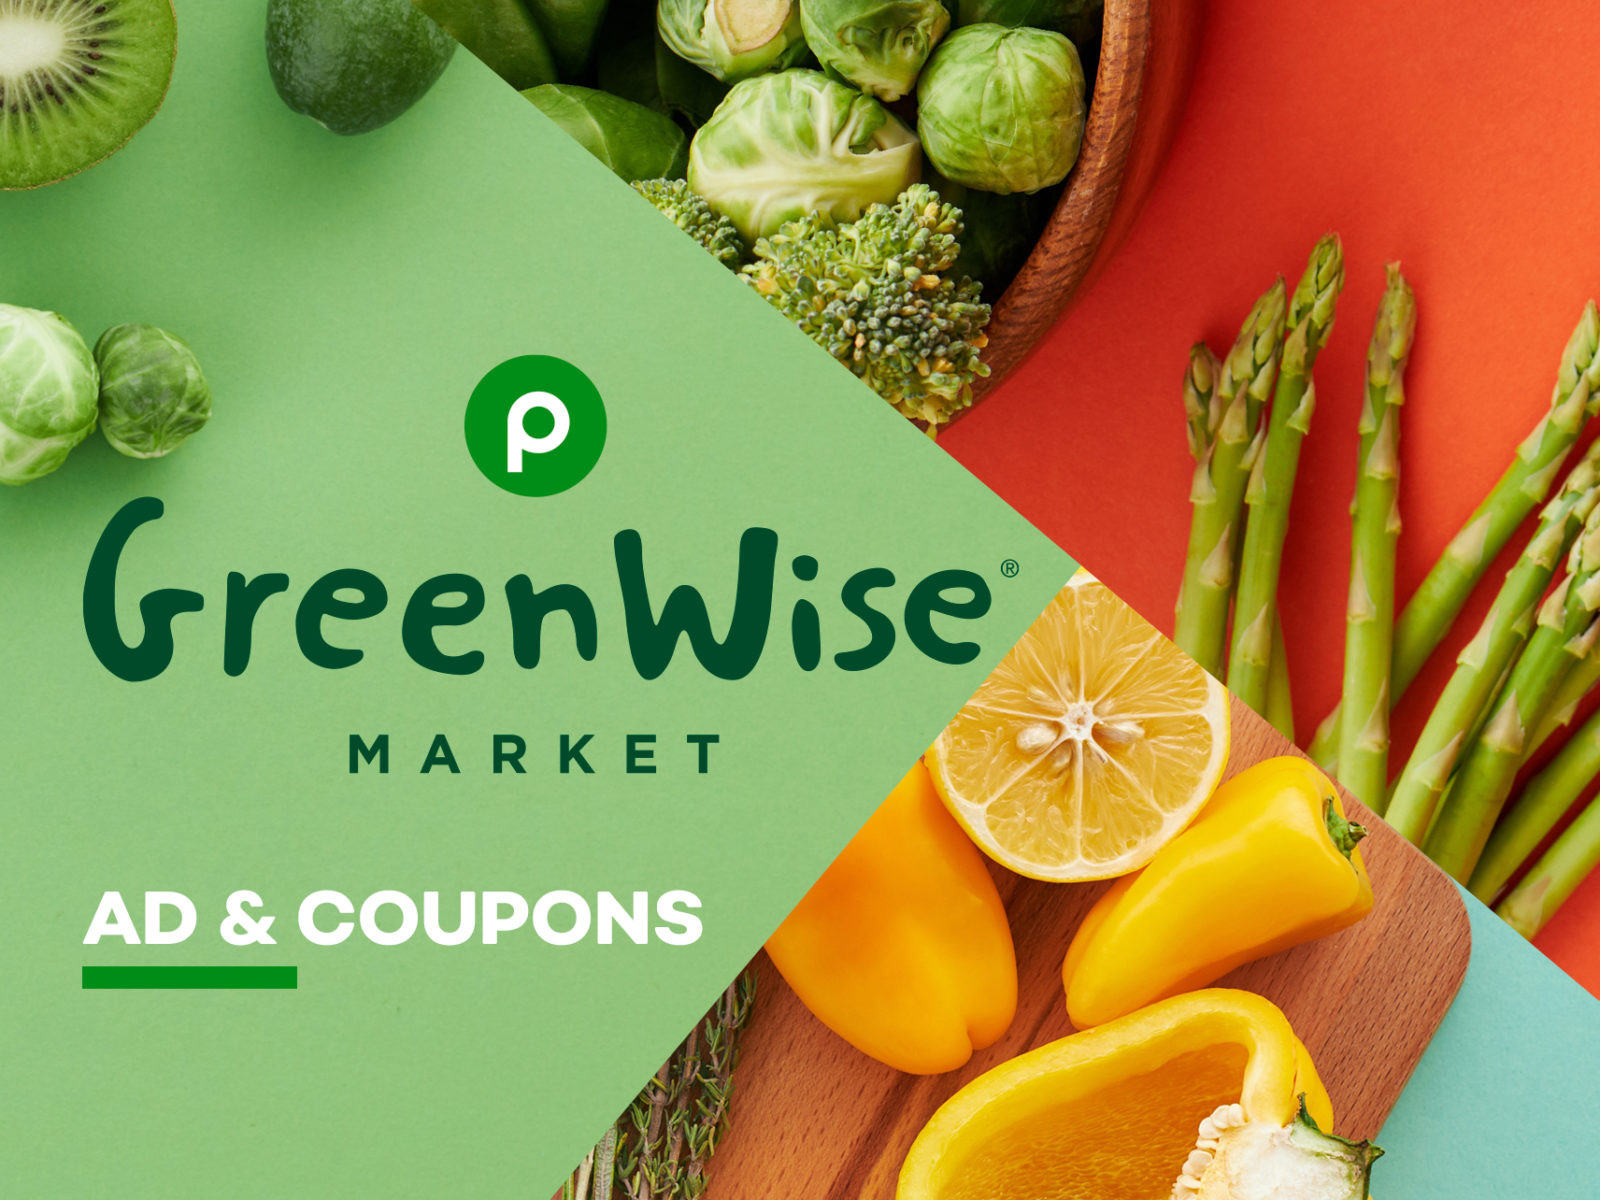 Publix GreenWise Market Ad & Coupons Week Of 11/9 To 11/15 (11/8 to 11/14 For Some)